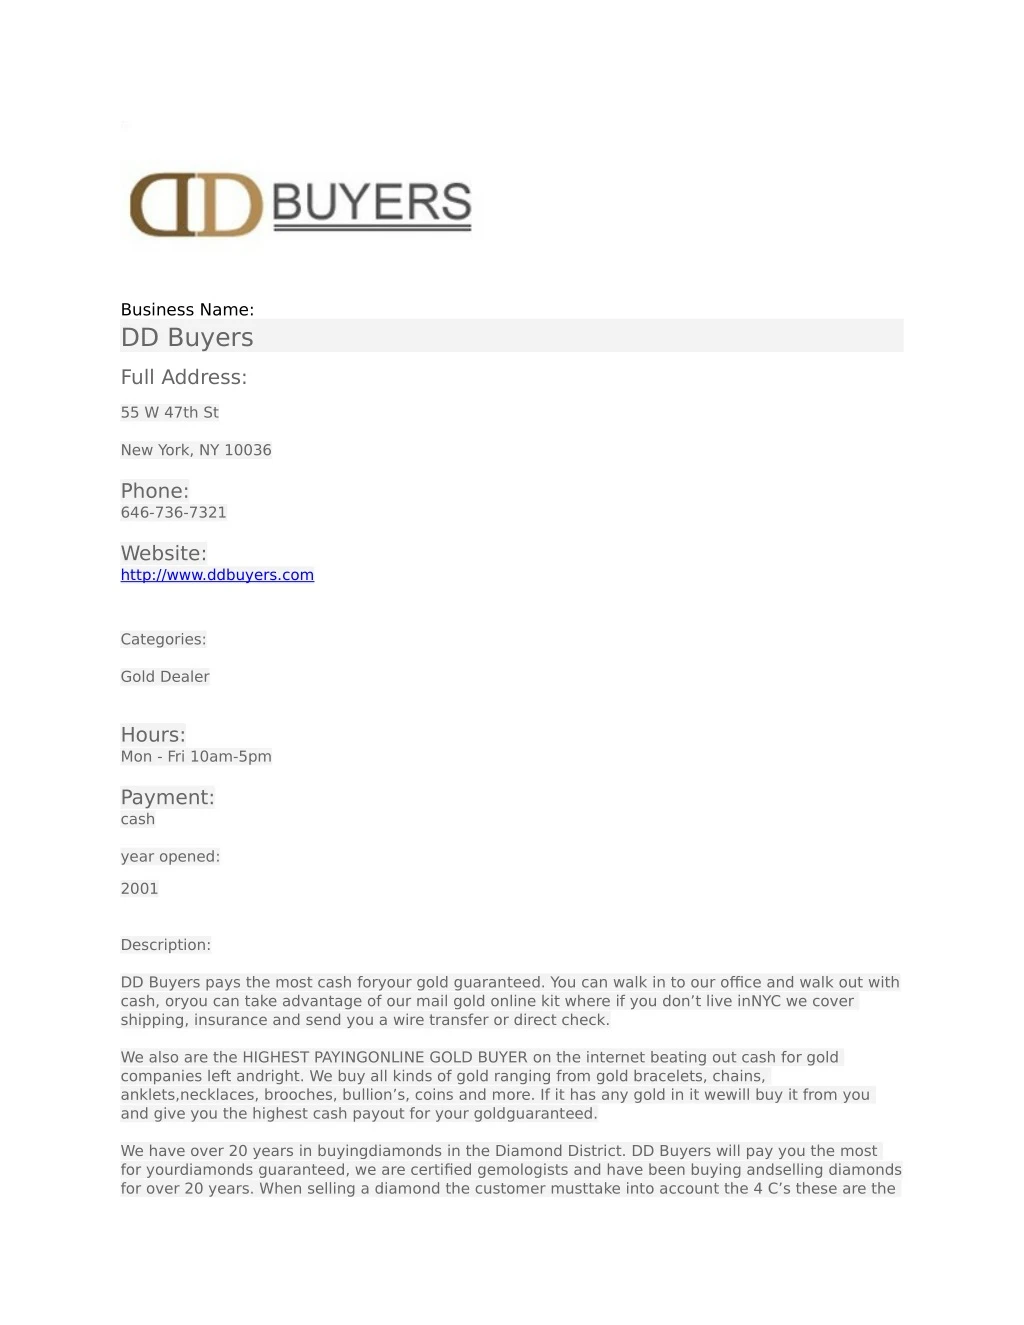 business name dd buyers